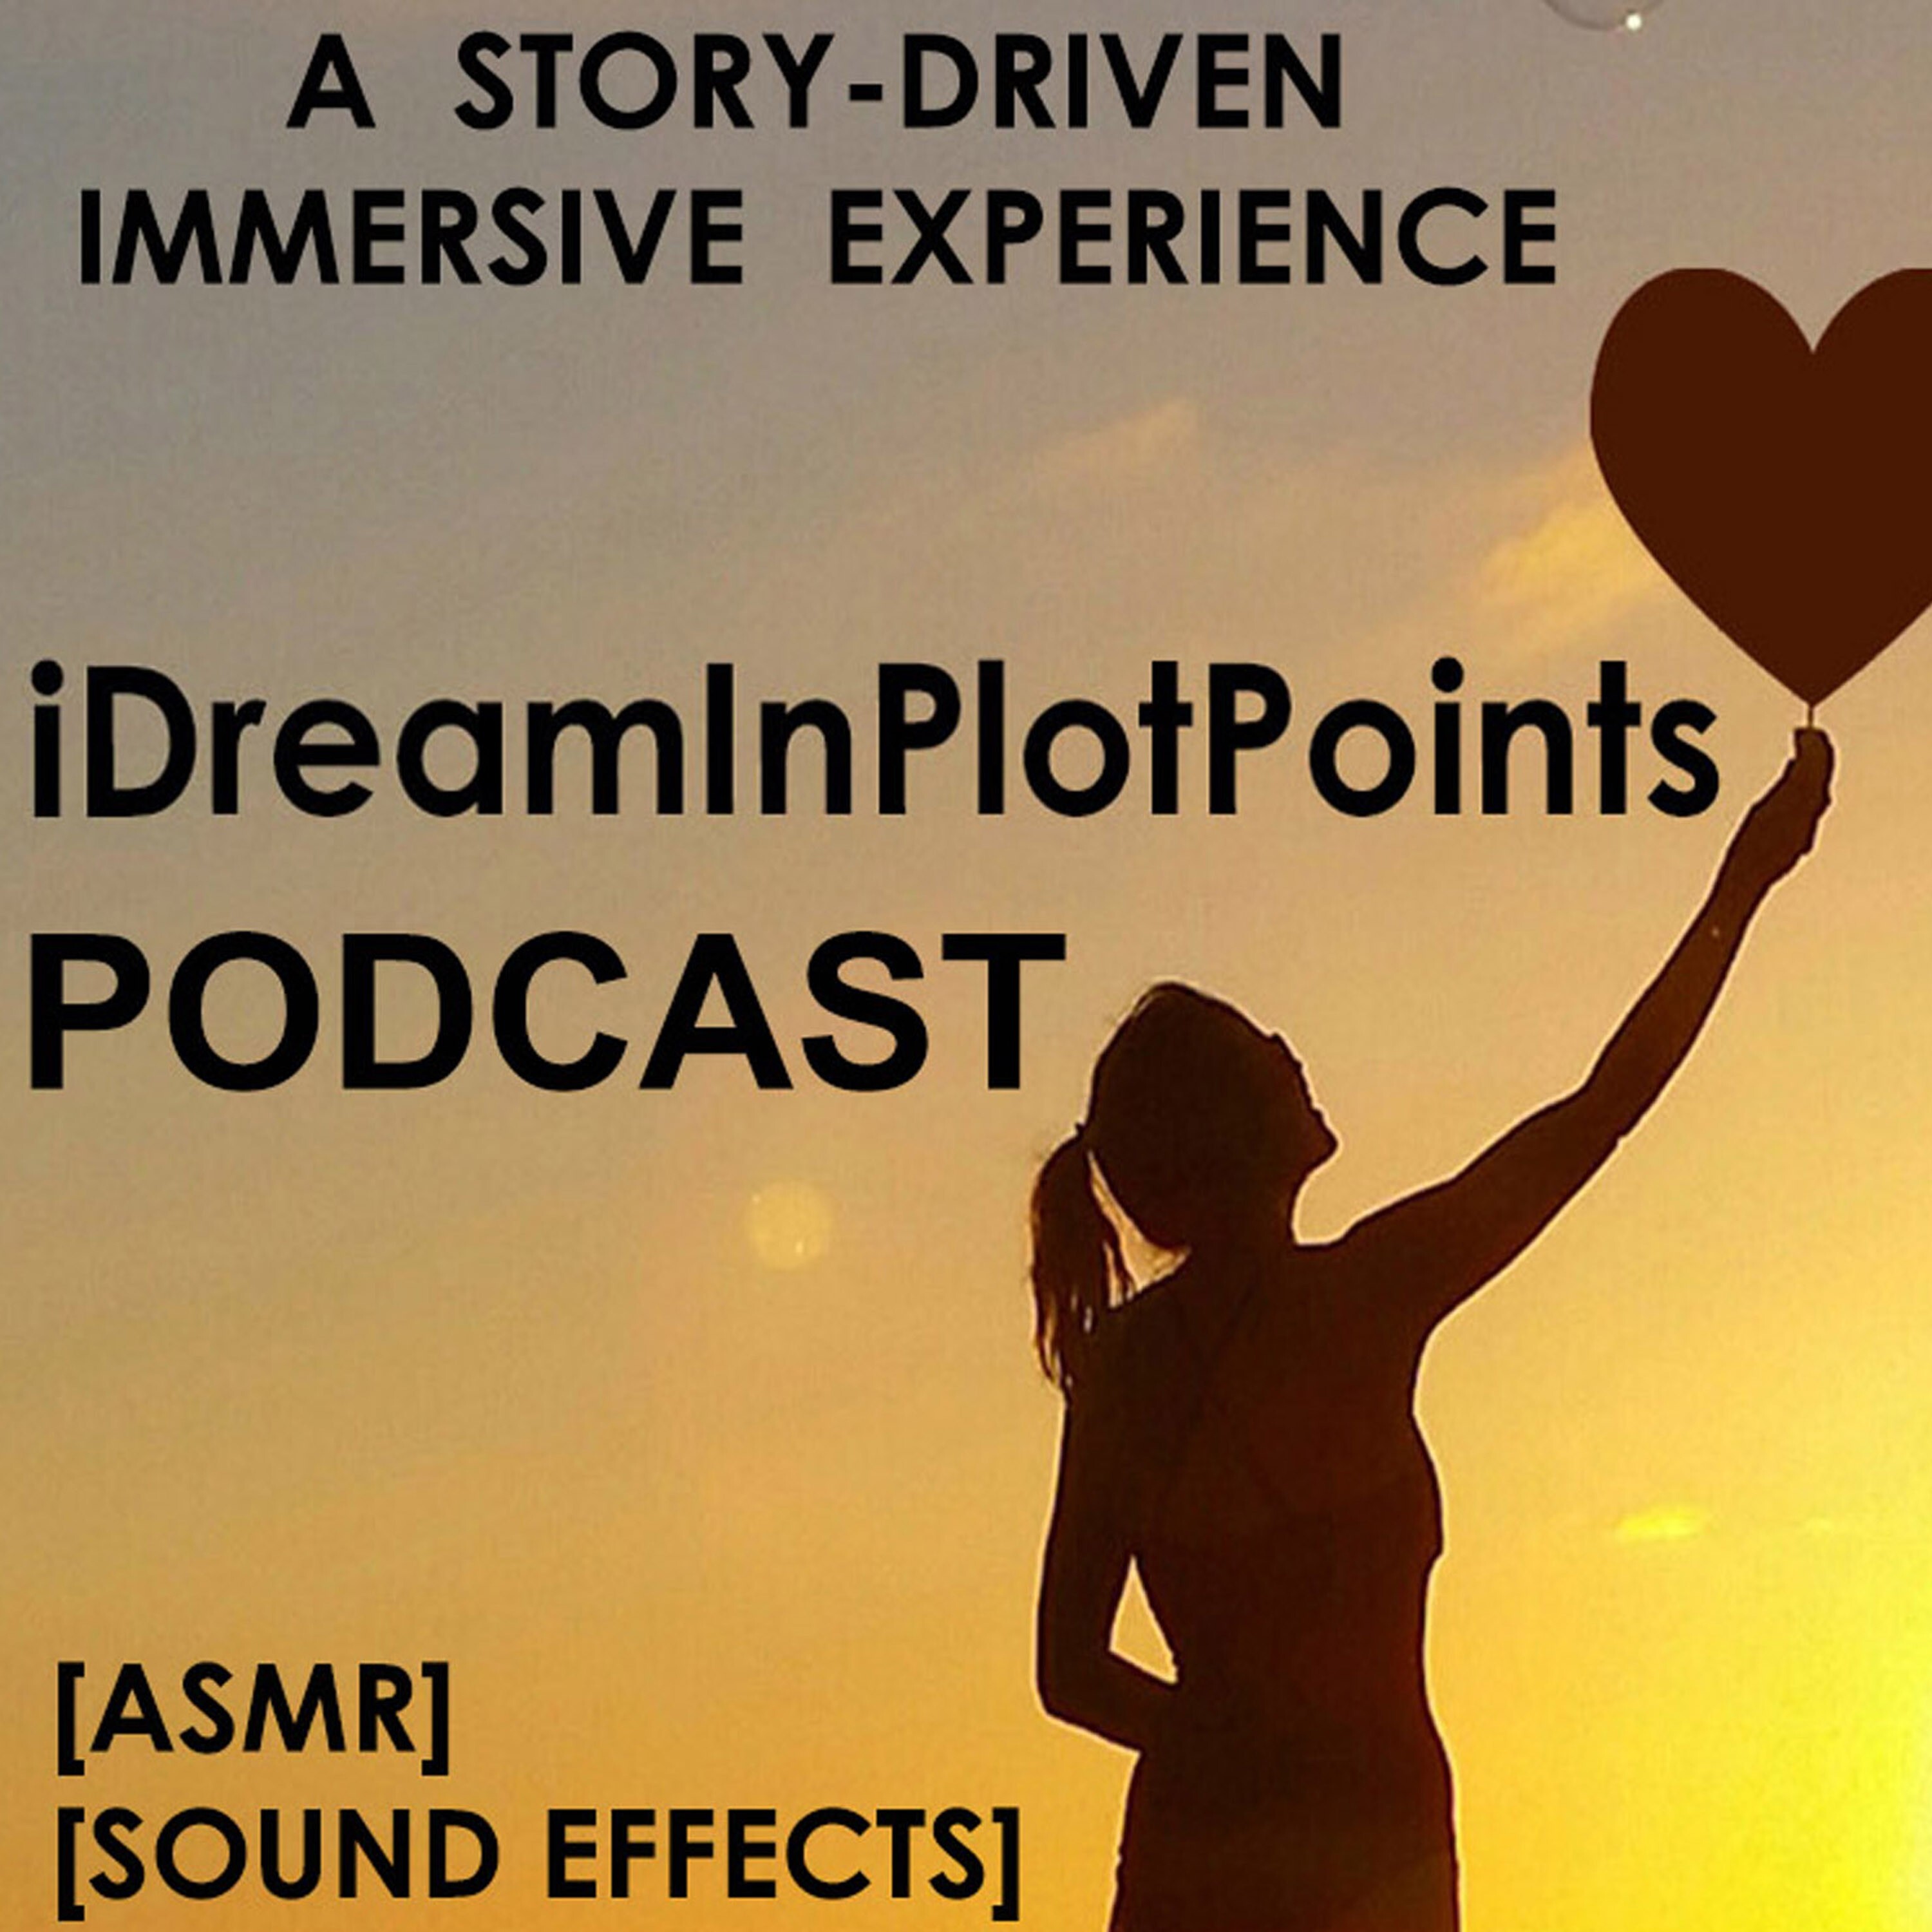 I Dream In Plot Points podcast